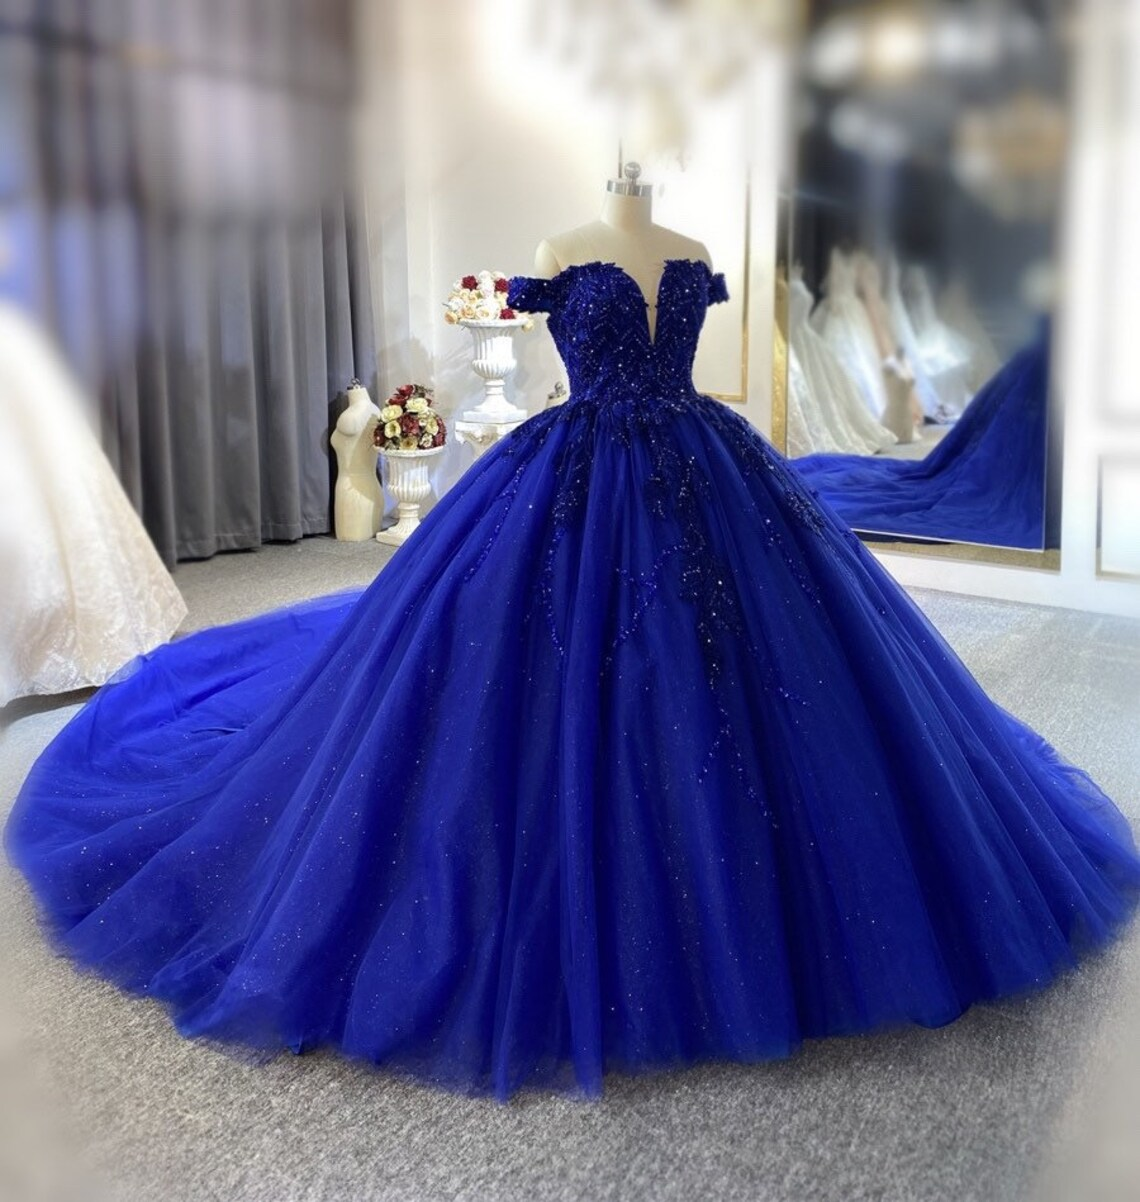 Luxury Blue Ball Gown Prom Dresses Quinceanera Sweet 16 Dress